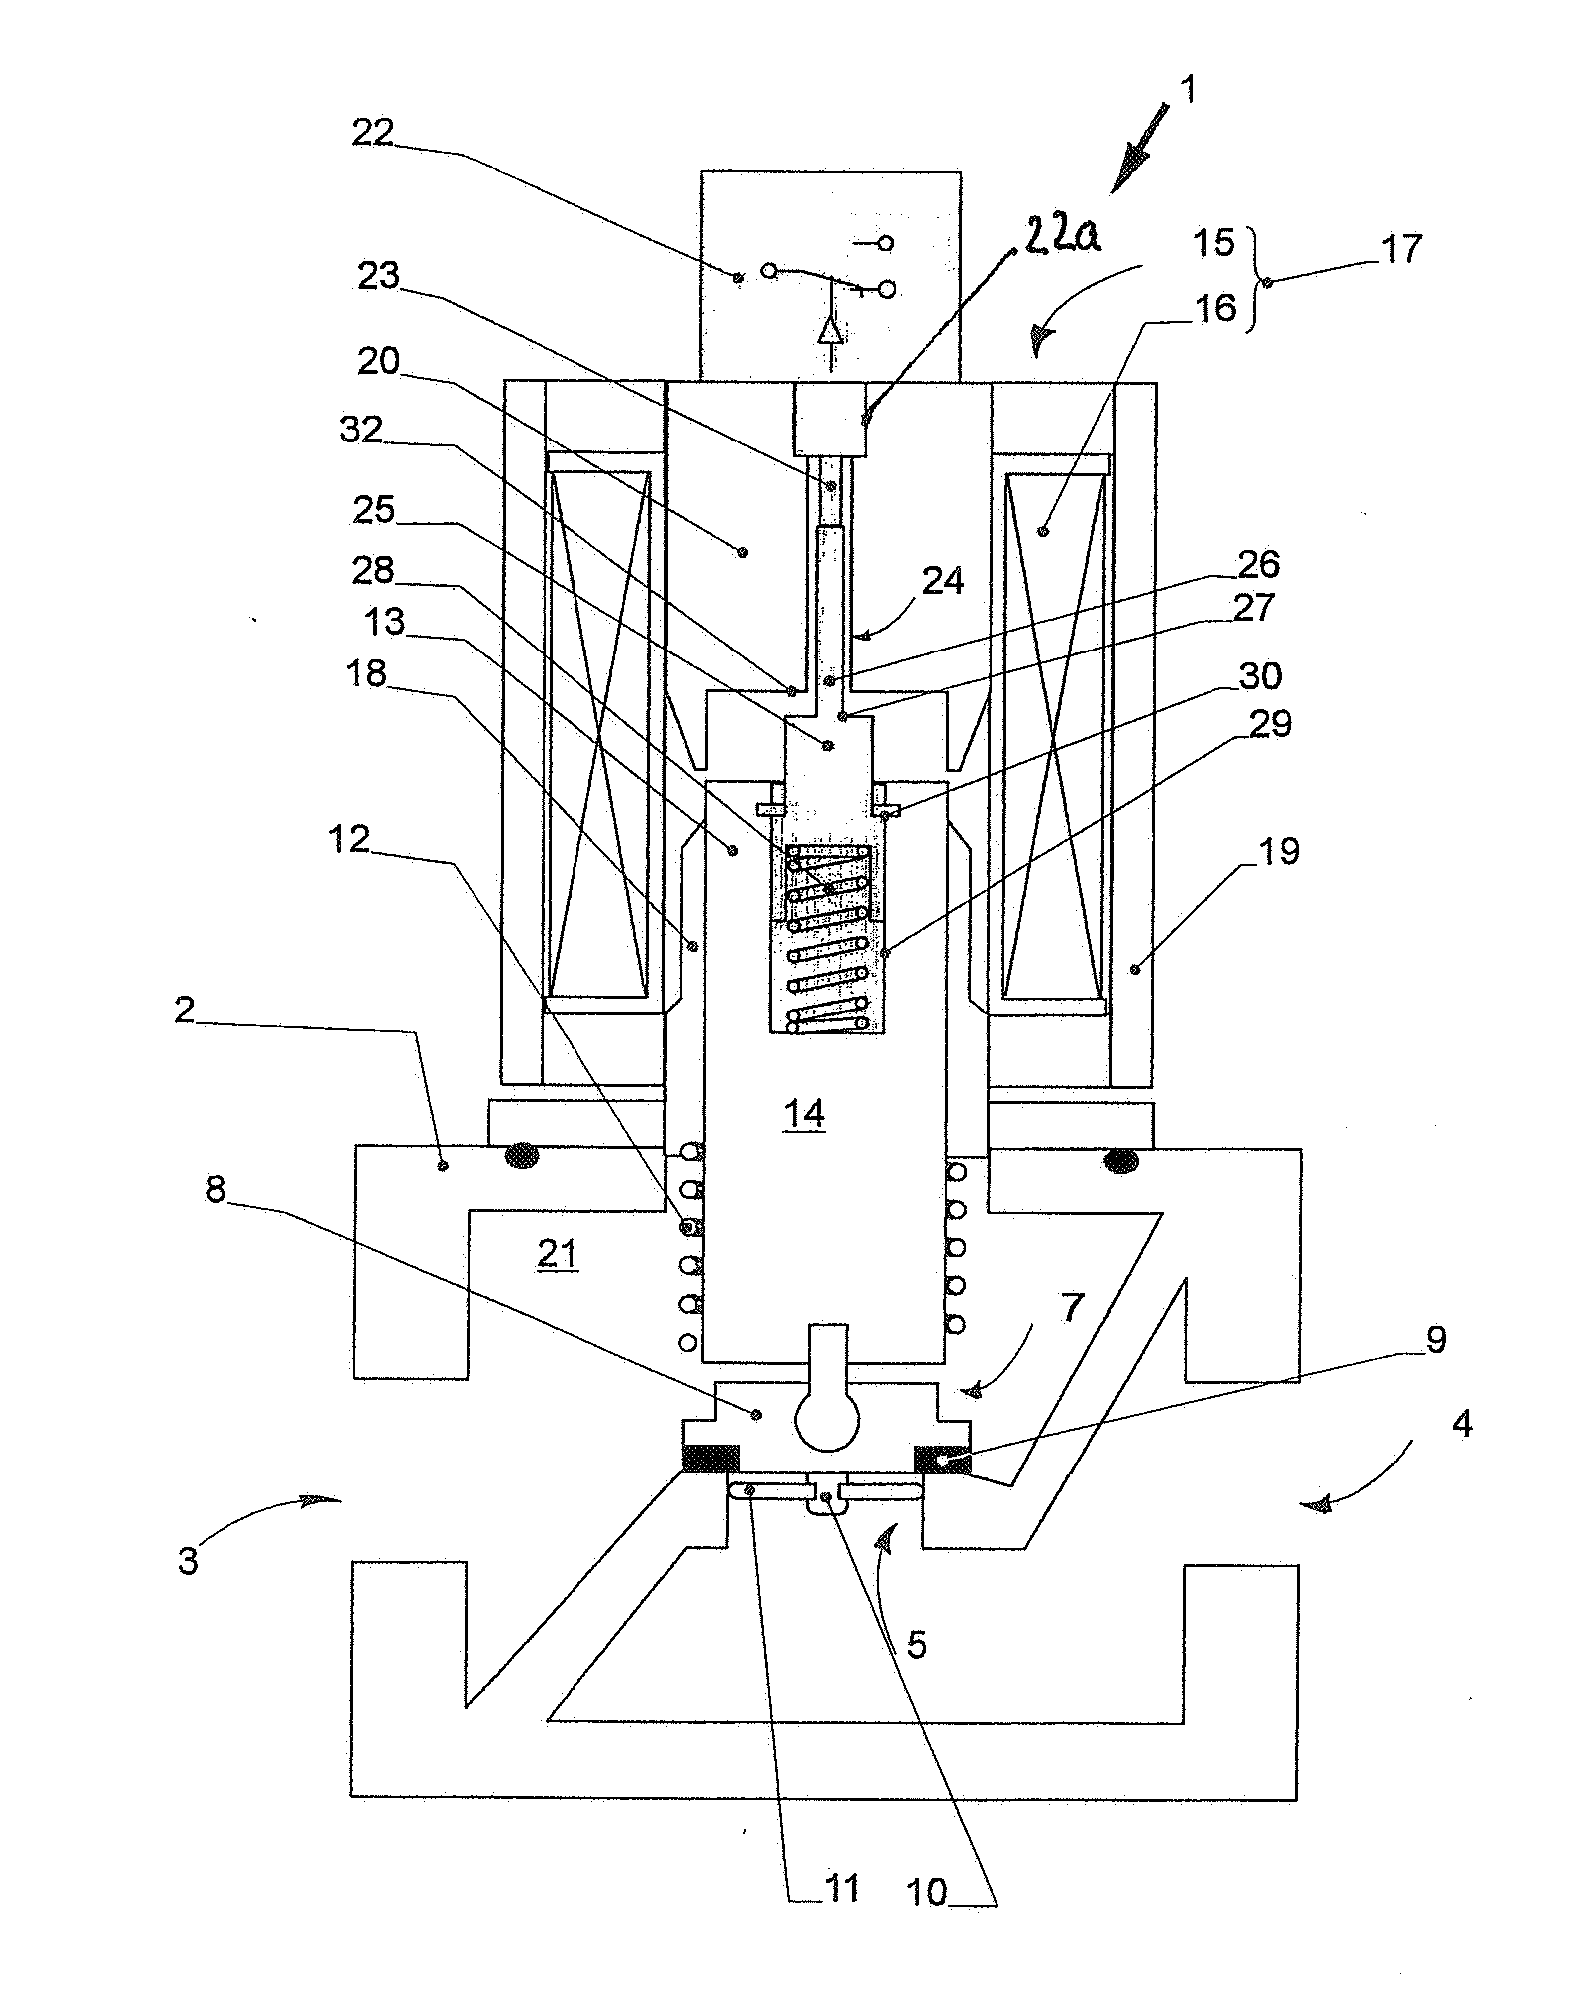 Valve with end position switching